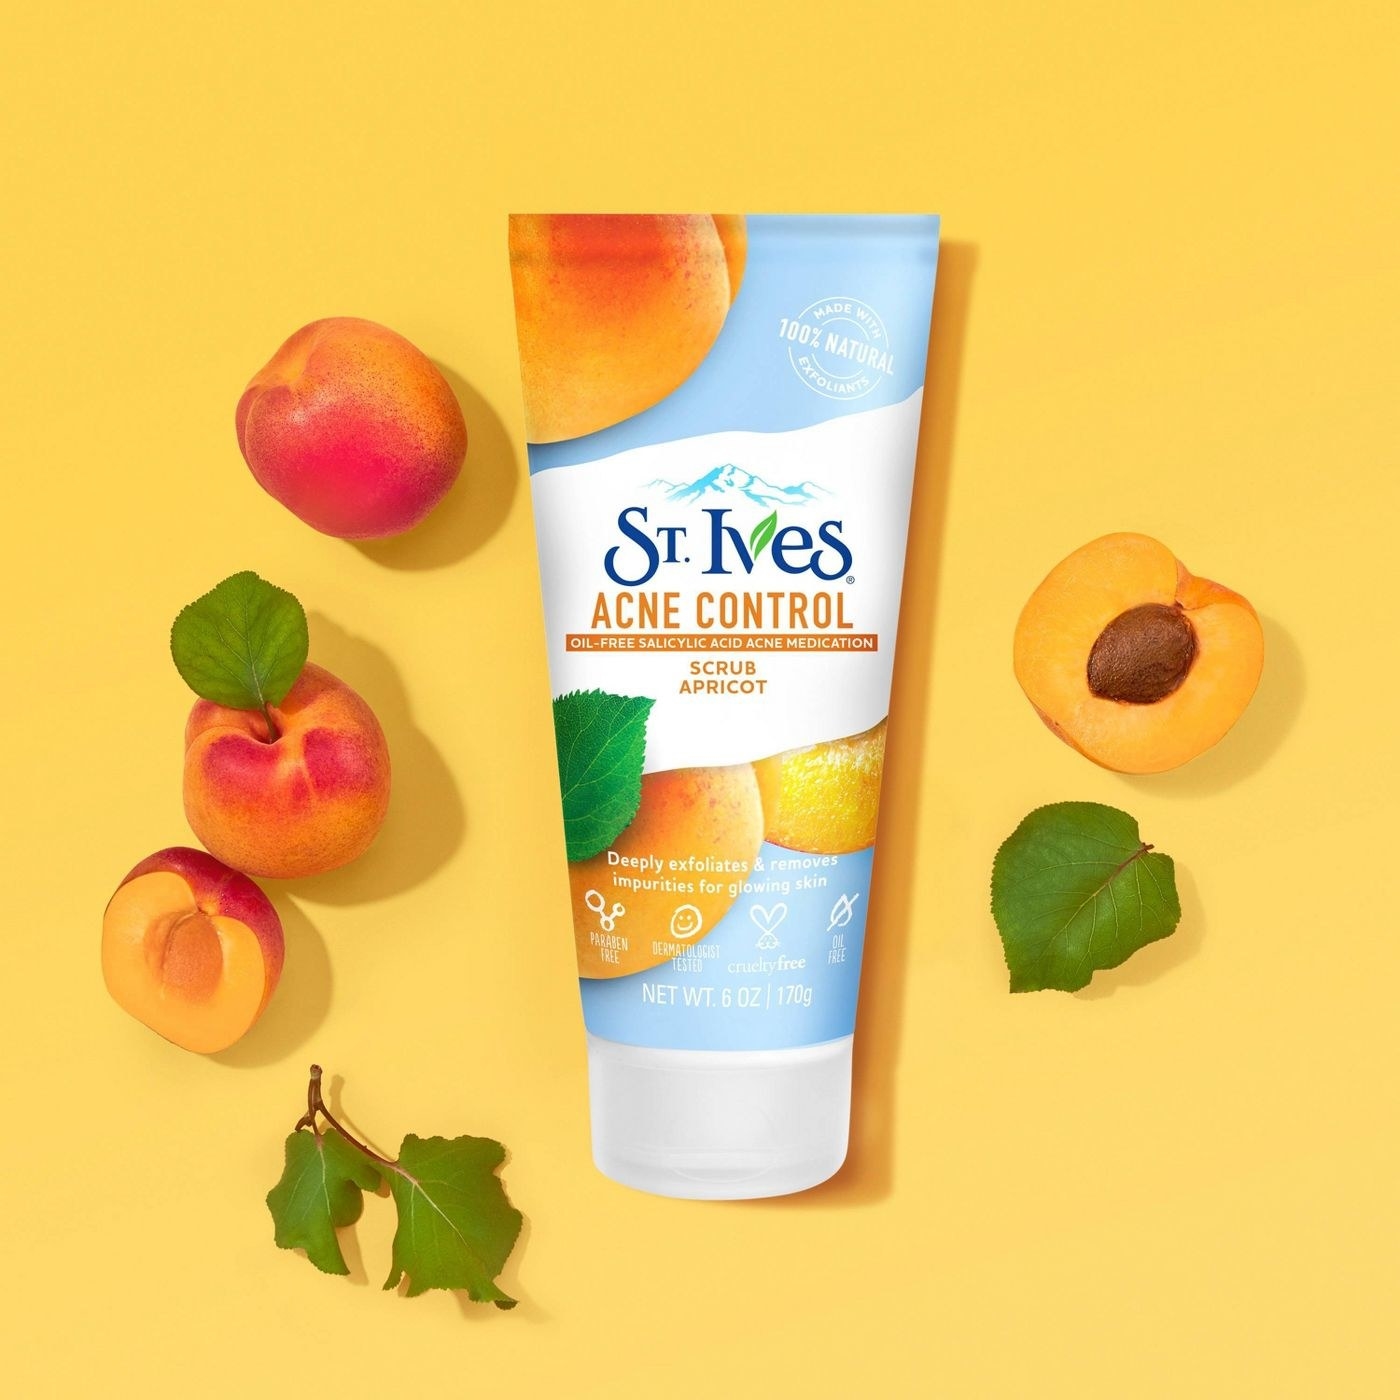 The St. Ives Oil-Free Acne Control Apricot Face Scrub